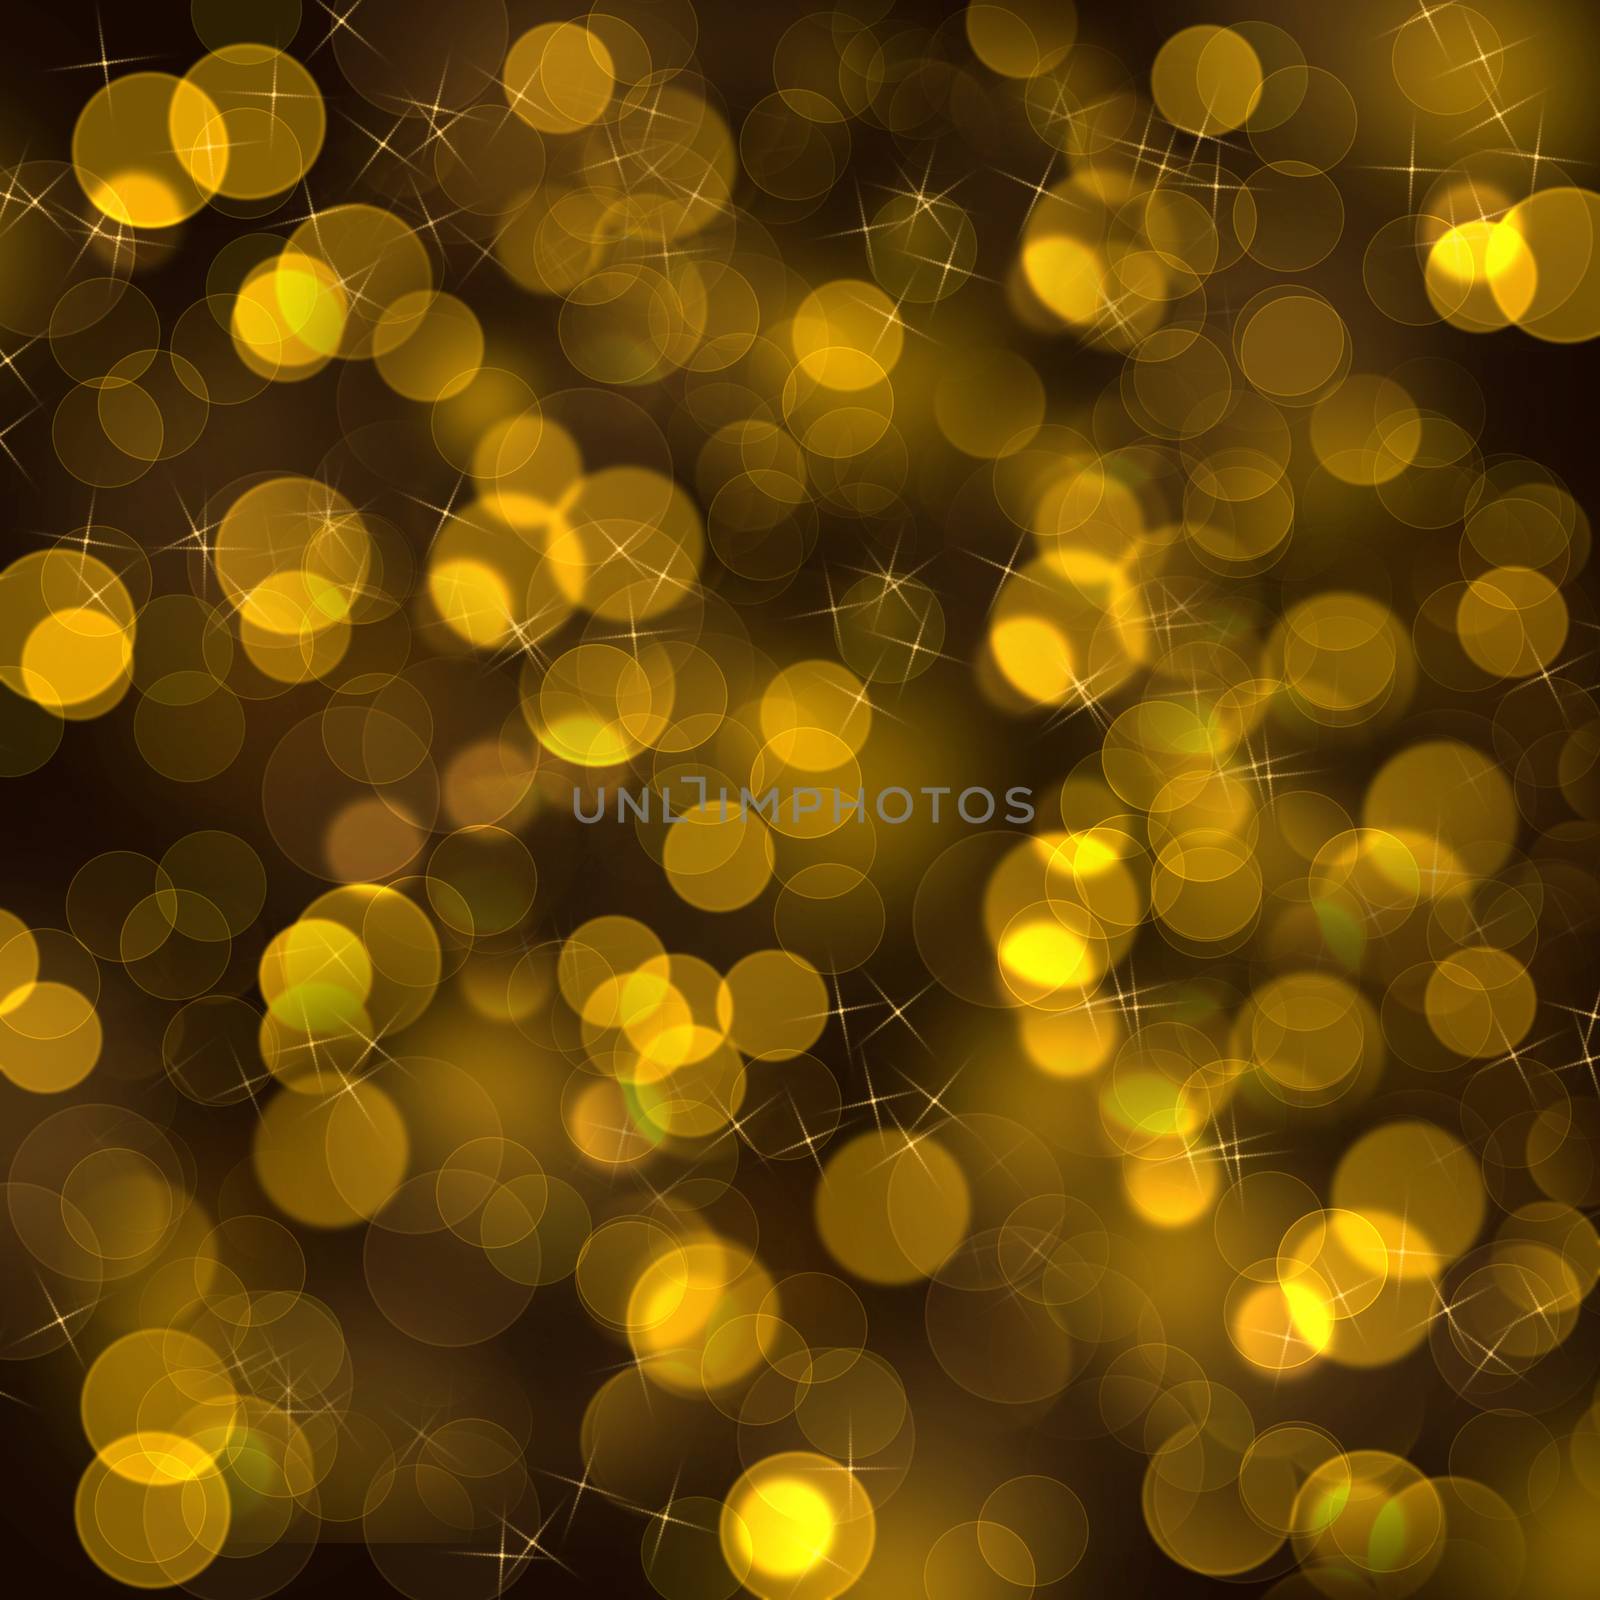 Unfocused circles and gold stars on a black background.Texture or background